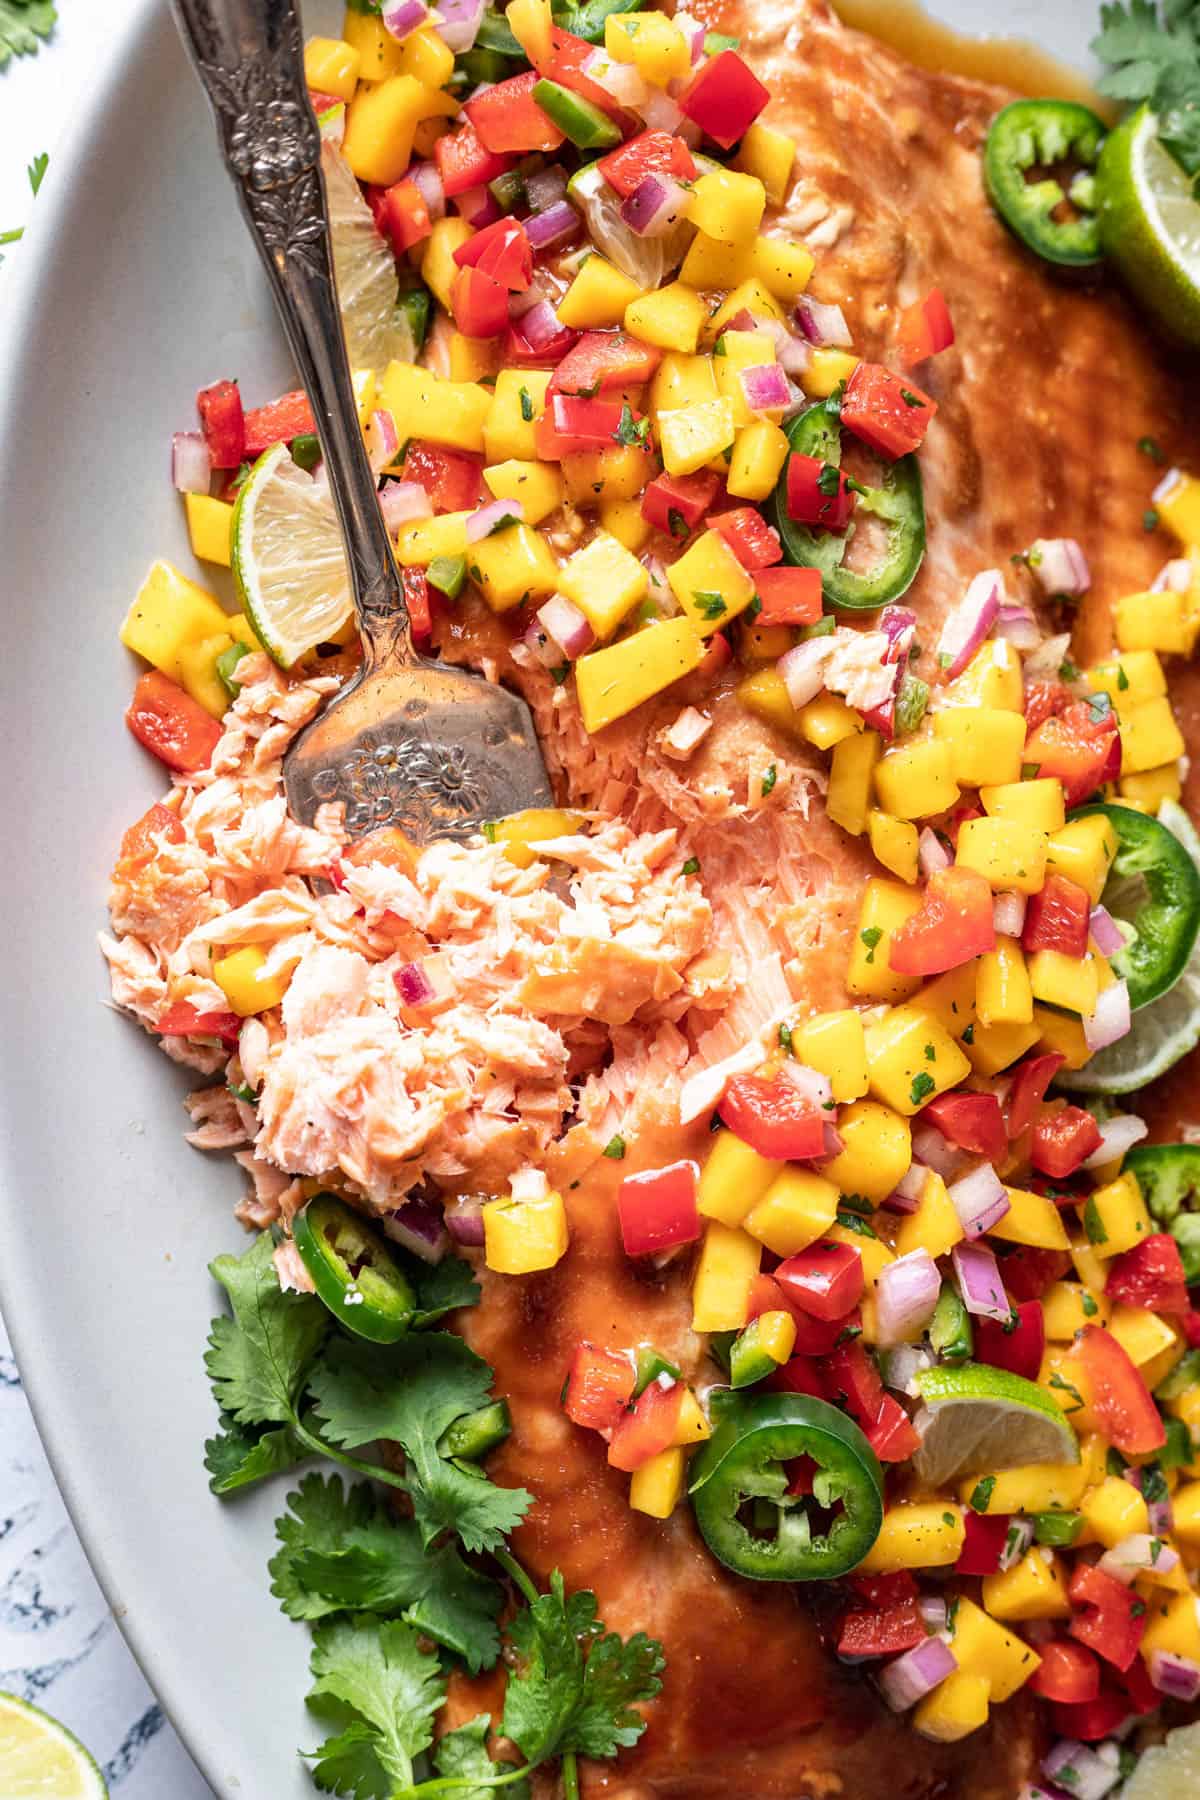 Close up of a large fillet of salmon with mango salsa on top, served on a white plate with a fork in it flaking off some pieces of salmon.